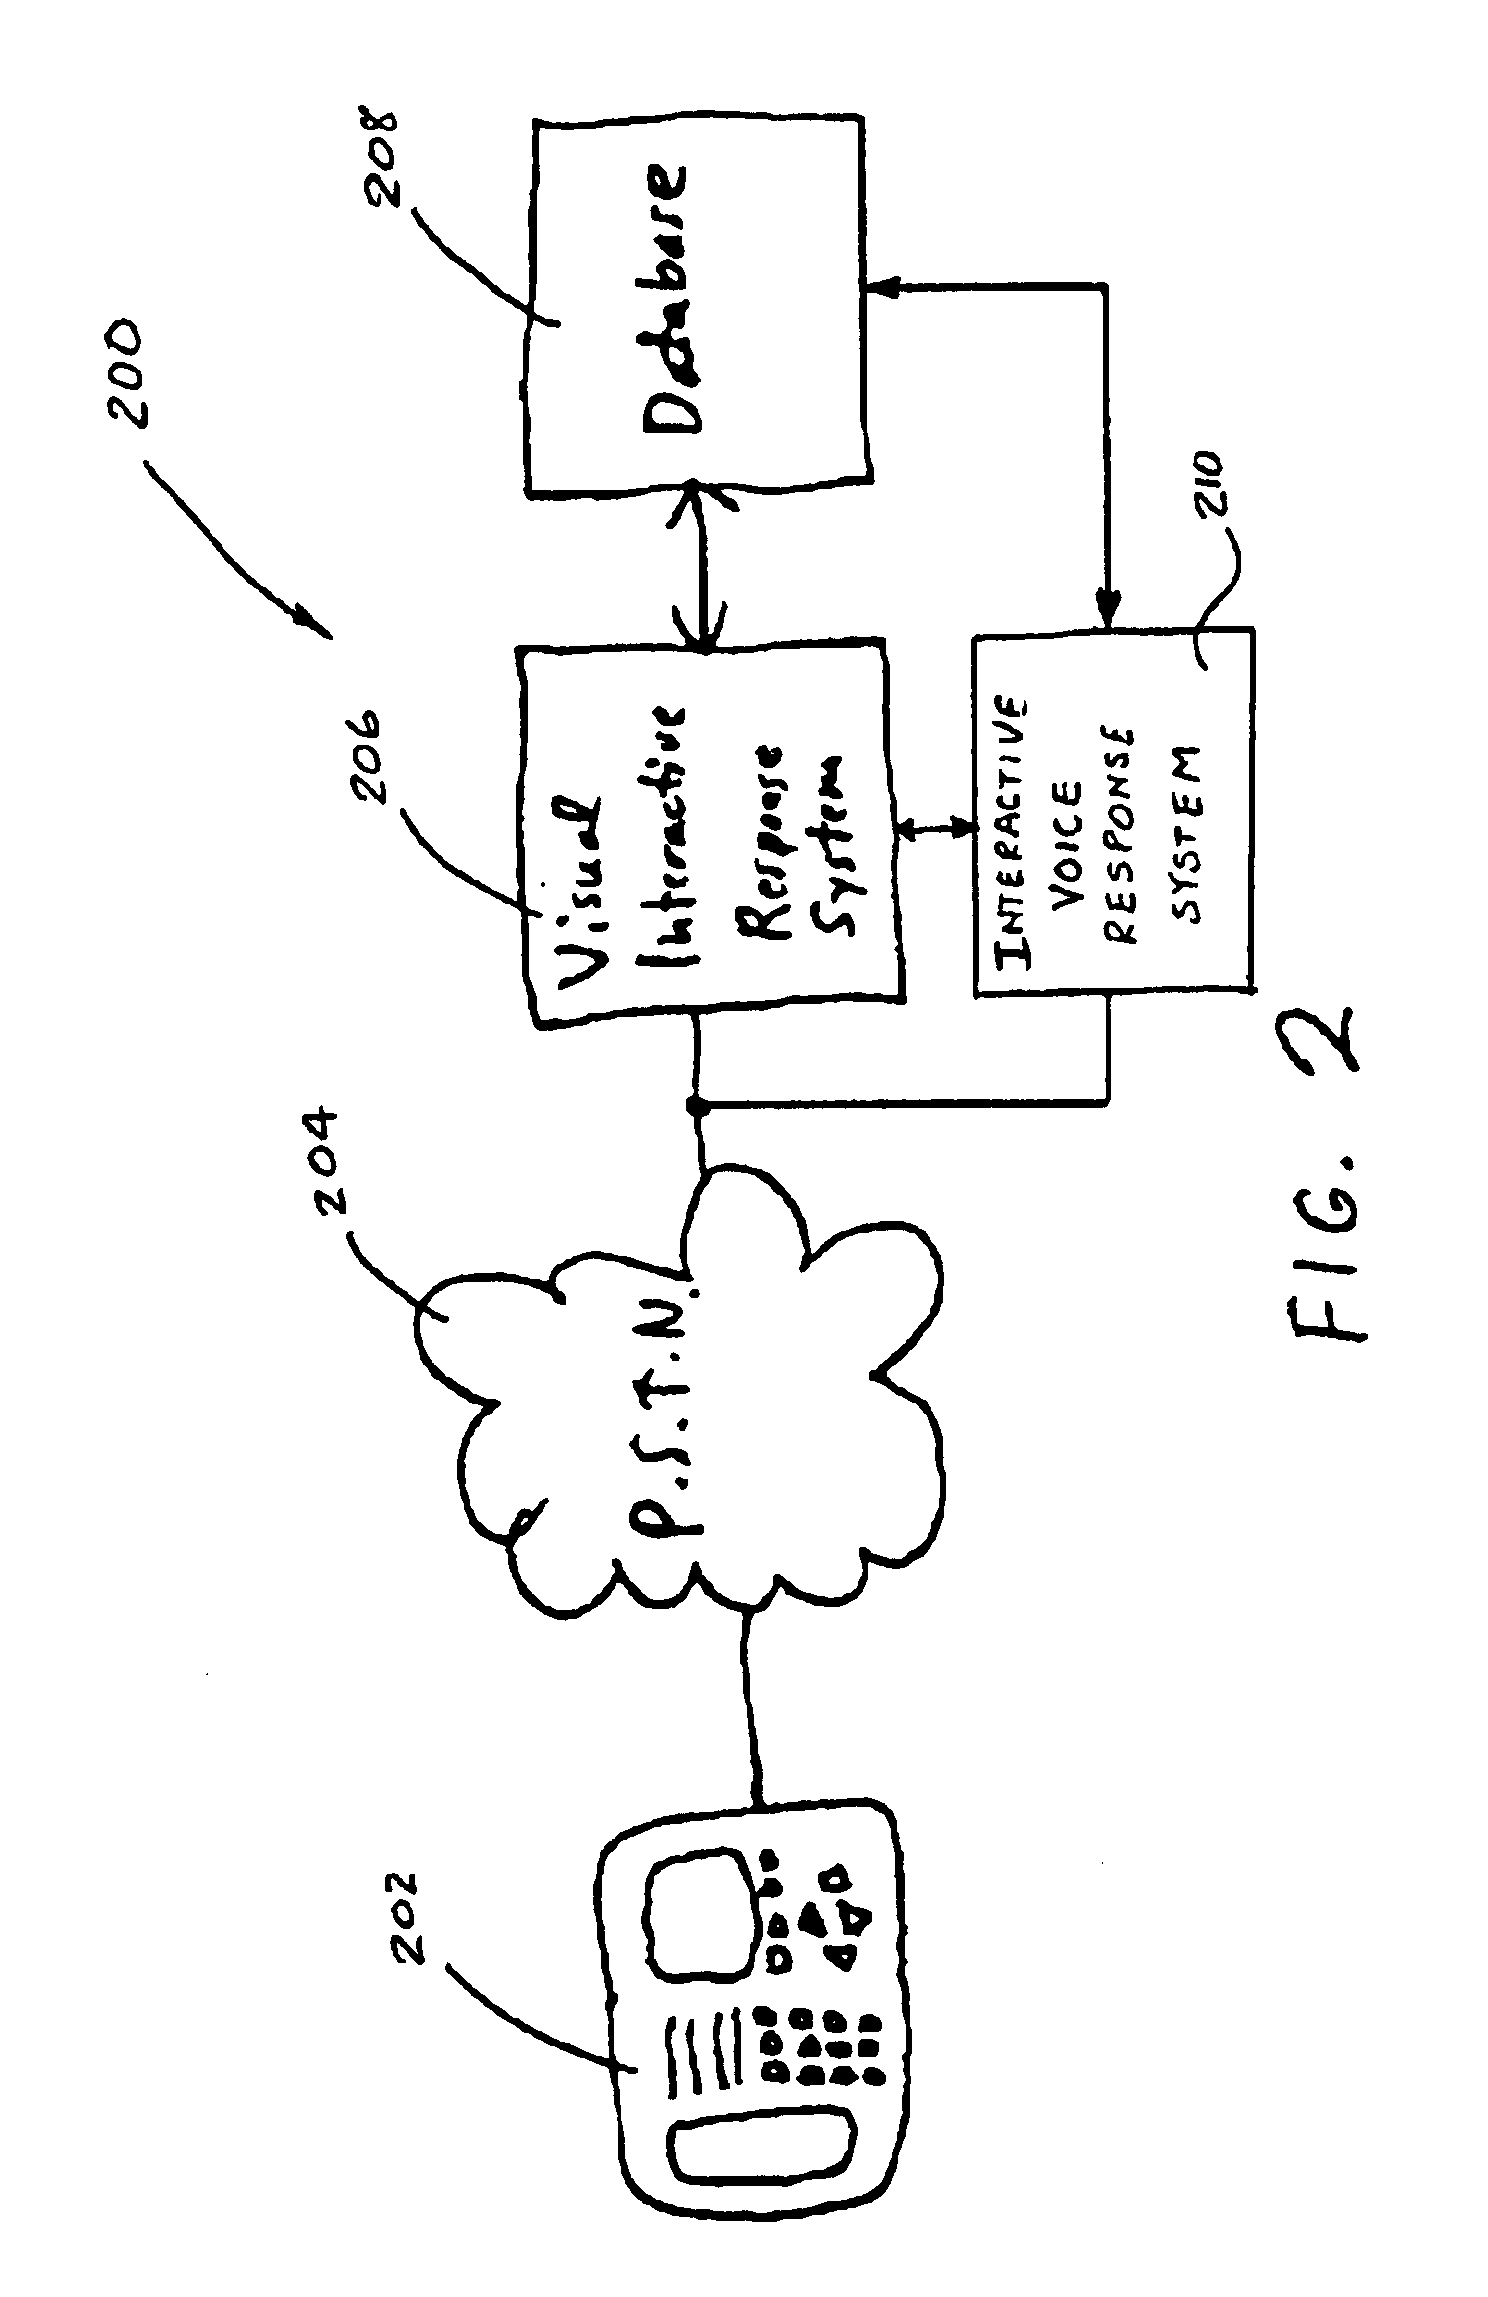 Visual interactive response system and method translated from interactive voice response for telephone utility